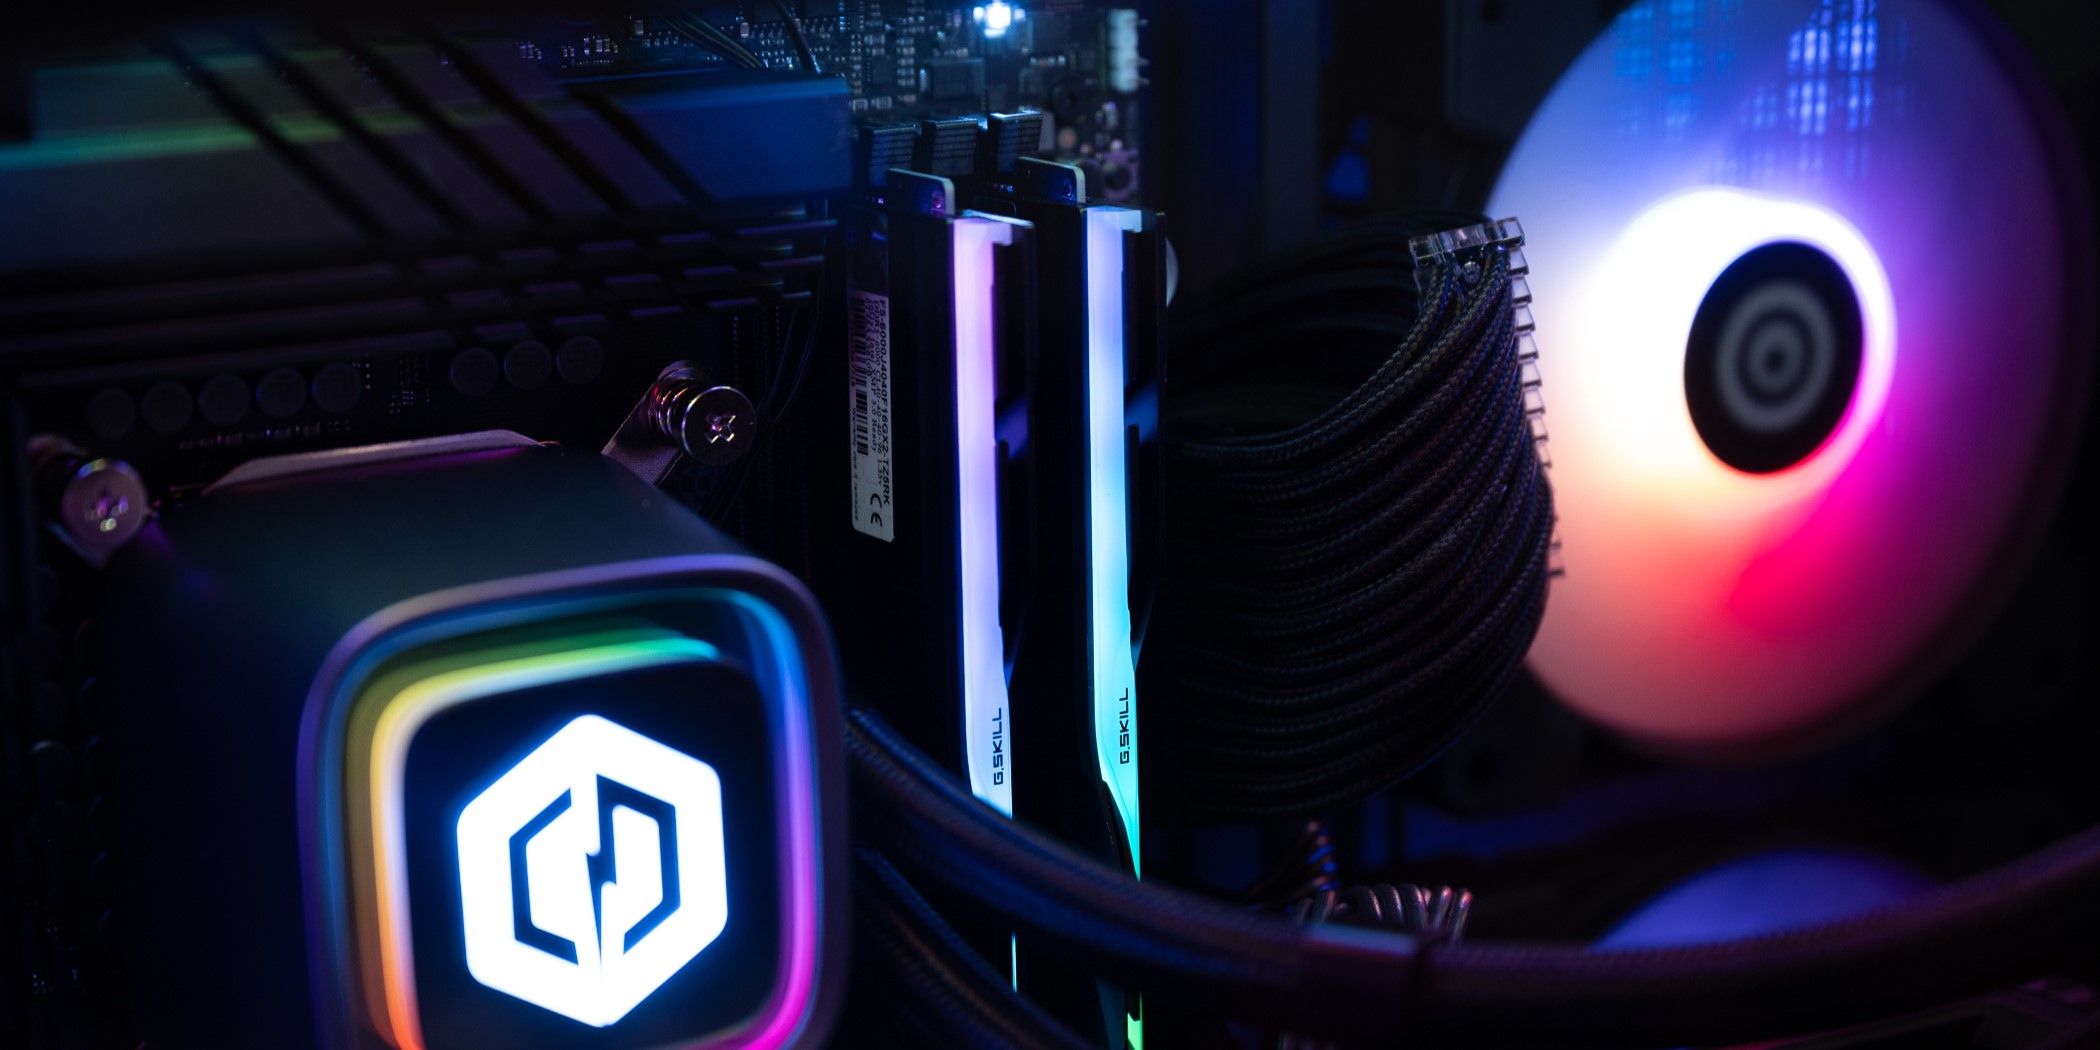 RGB pc fan, CPU cooler, and RAM inside a gaming computer